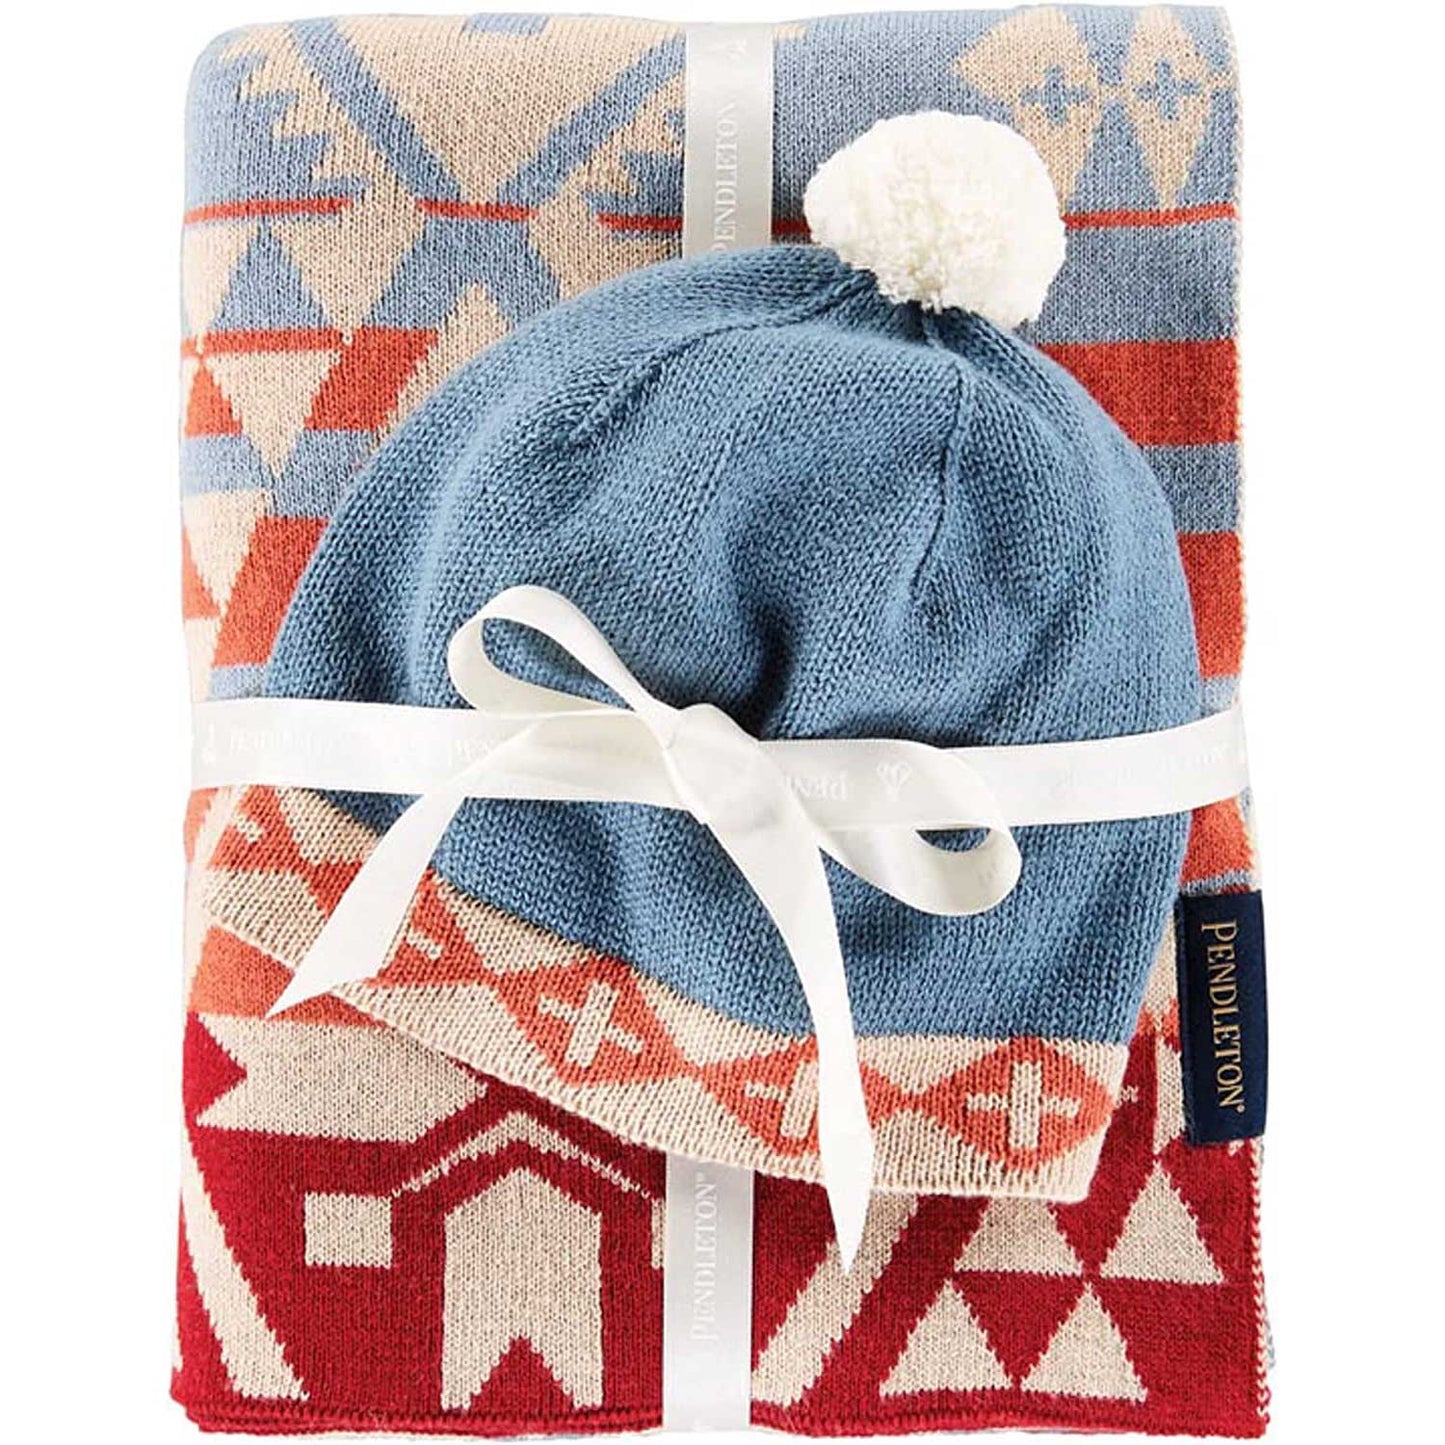 Pendleton Knit Baby Blanket with Beanie, Canyonlands Desert Sky